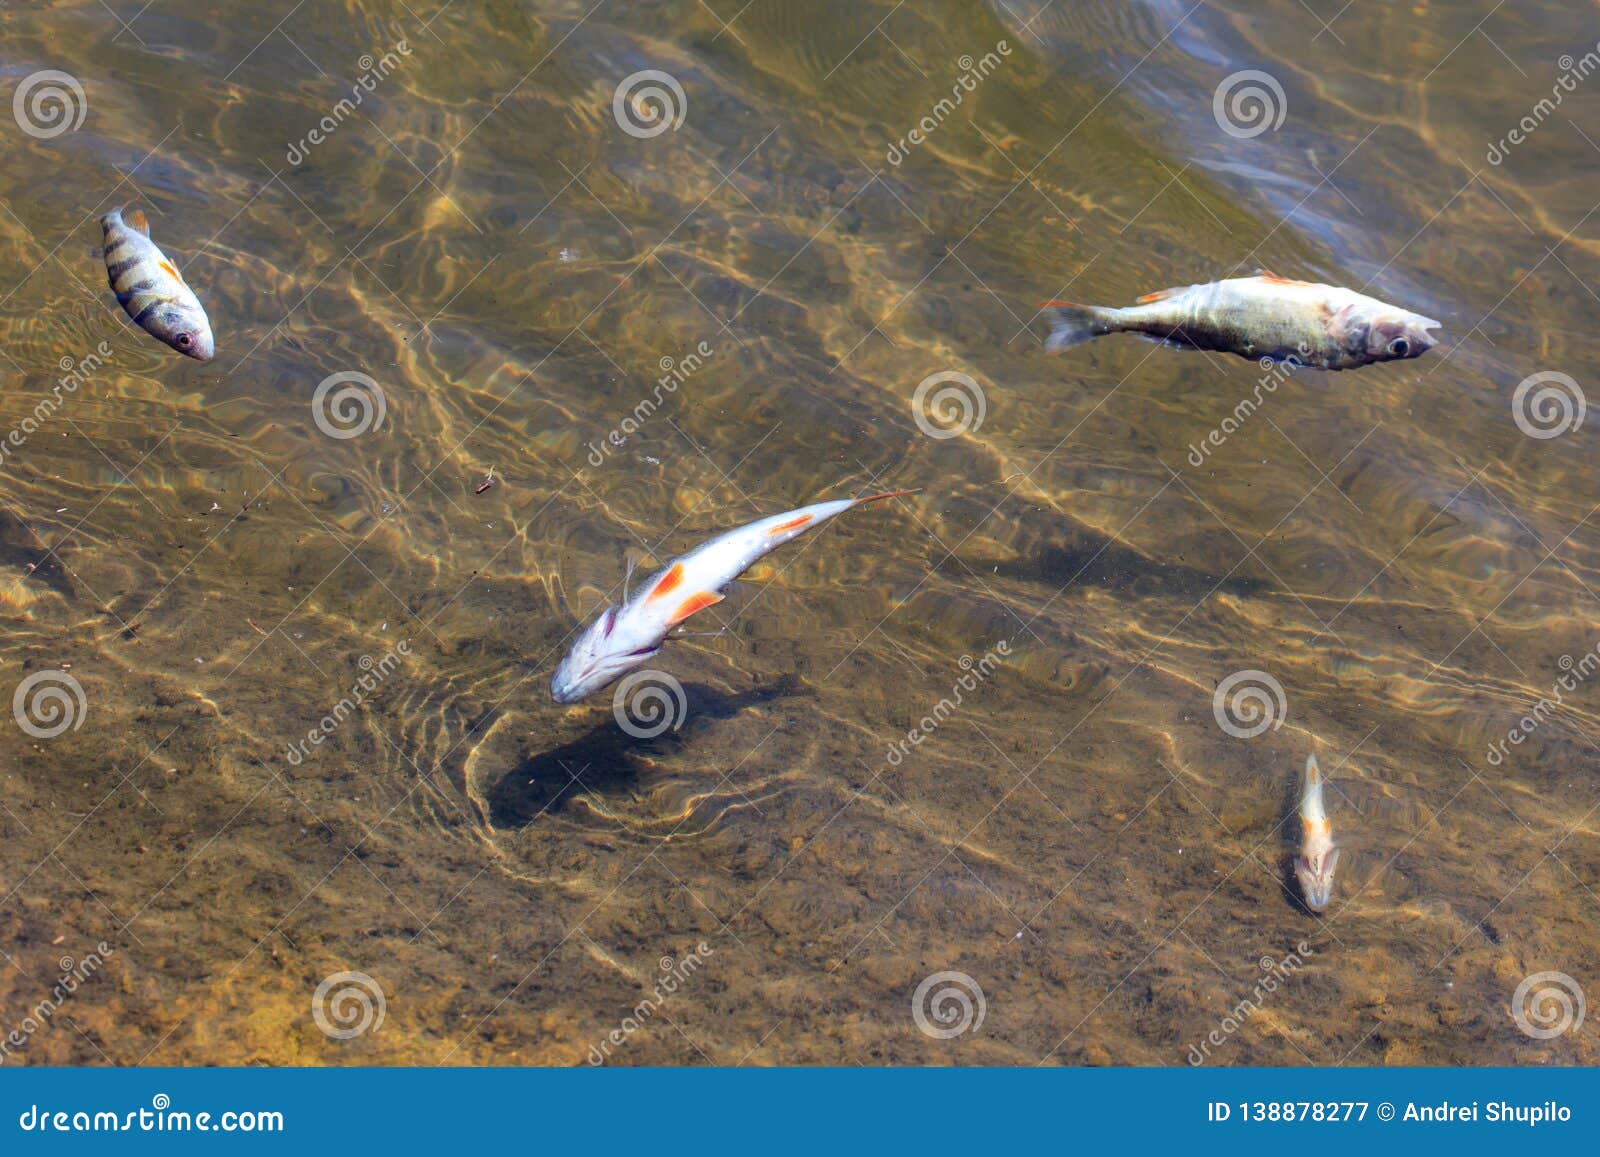 Dead Fish Floating on the Surface of the Water Stock Image - Image